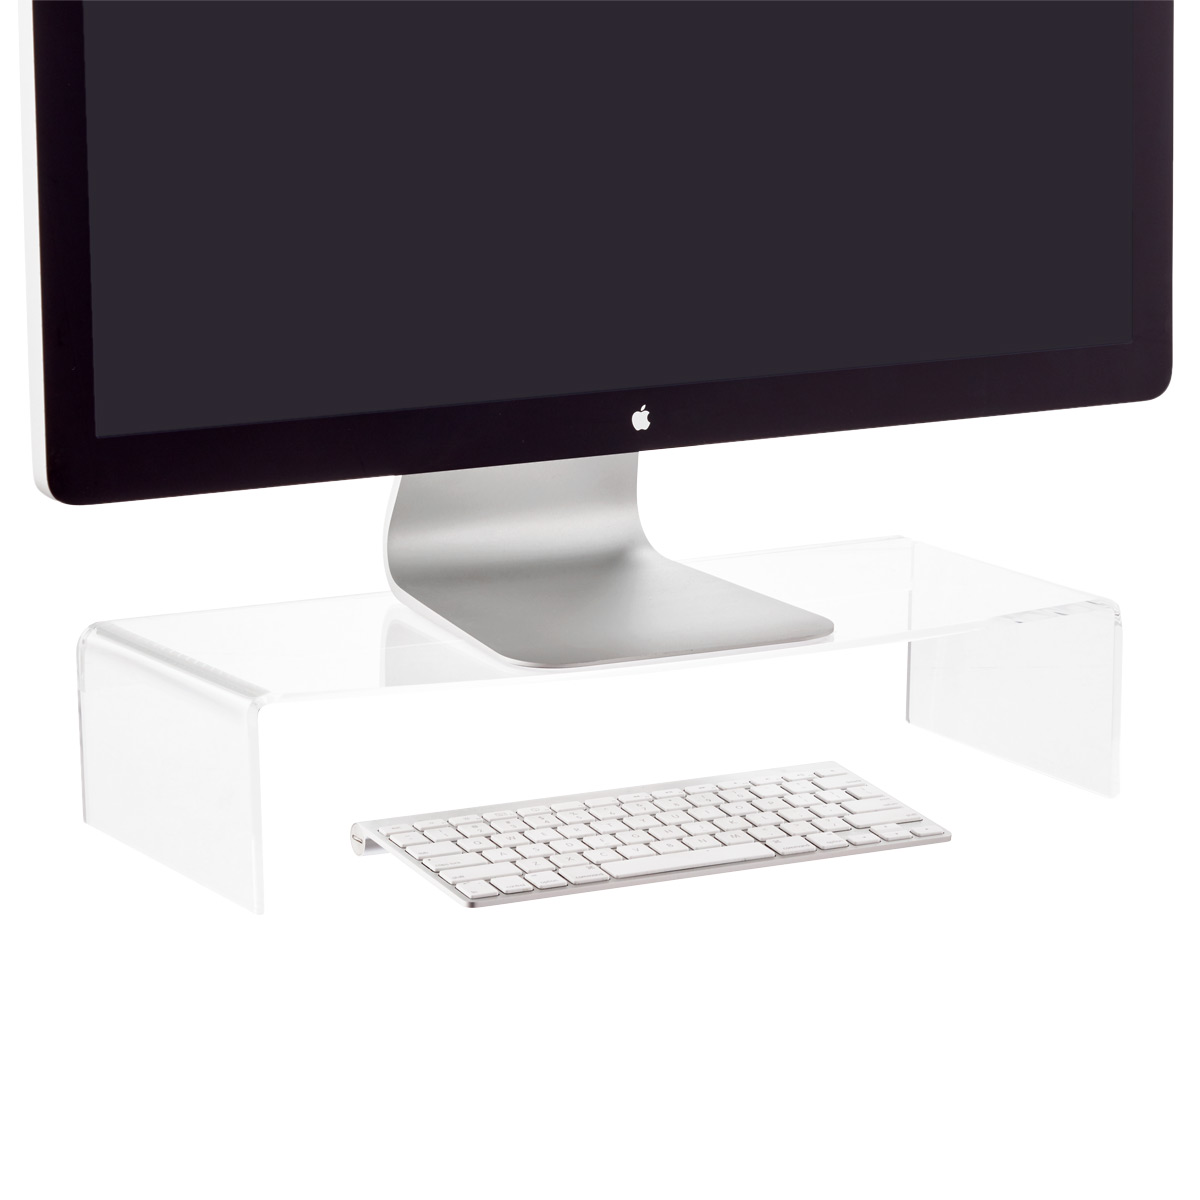 School Monitor Riser 20.5 x 8 x 3.5 inches Home Richboom Clear Acrylic Monitor Stand with Silicone Anti-Slip Case Computer Stand for Office PC Desk Stand for Keyboard Storage 